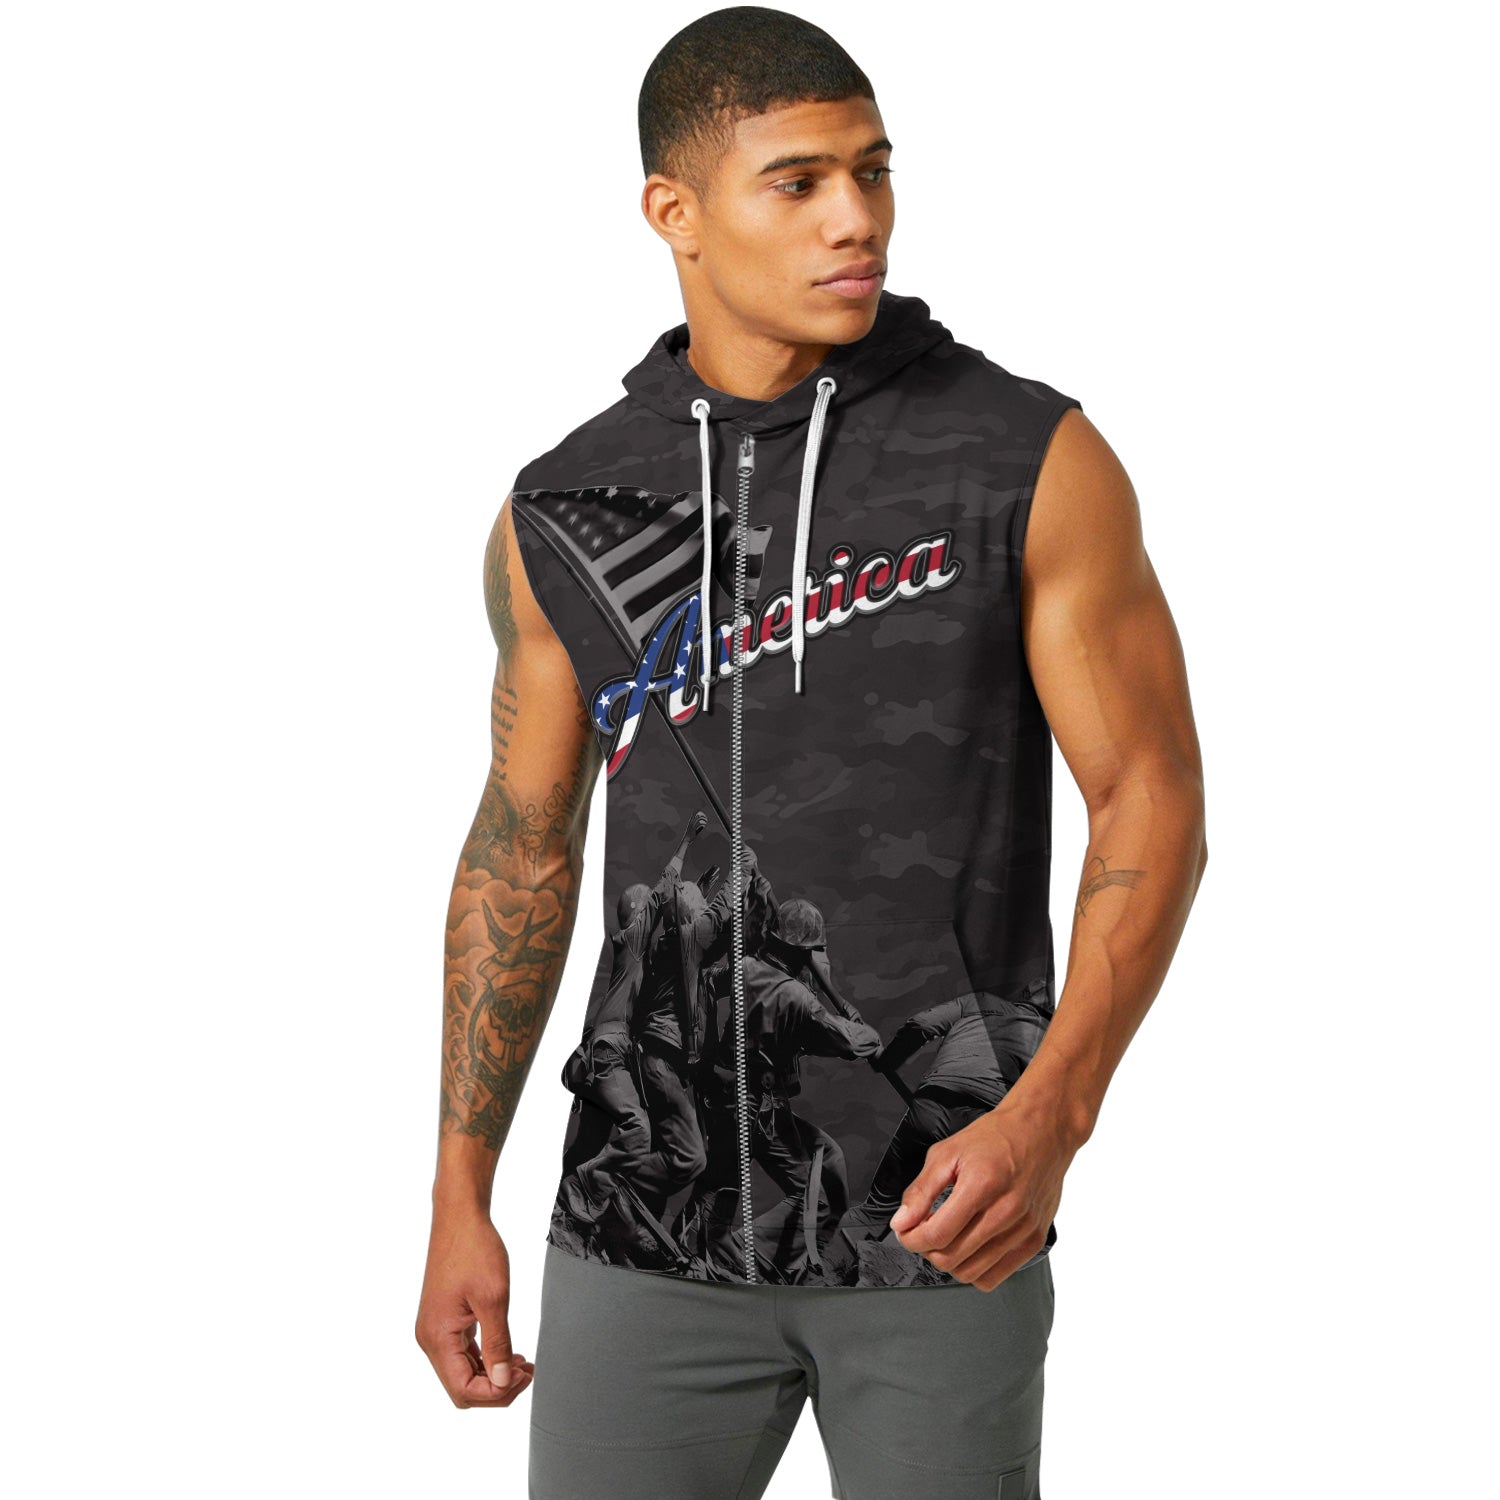 American Independence Day Sleeveless Pullover & Zip Hoodie